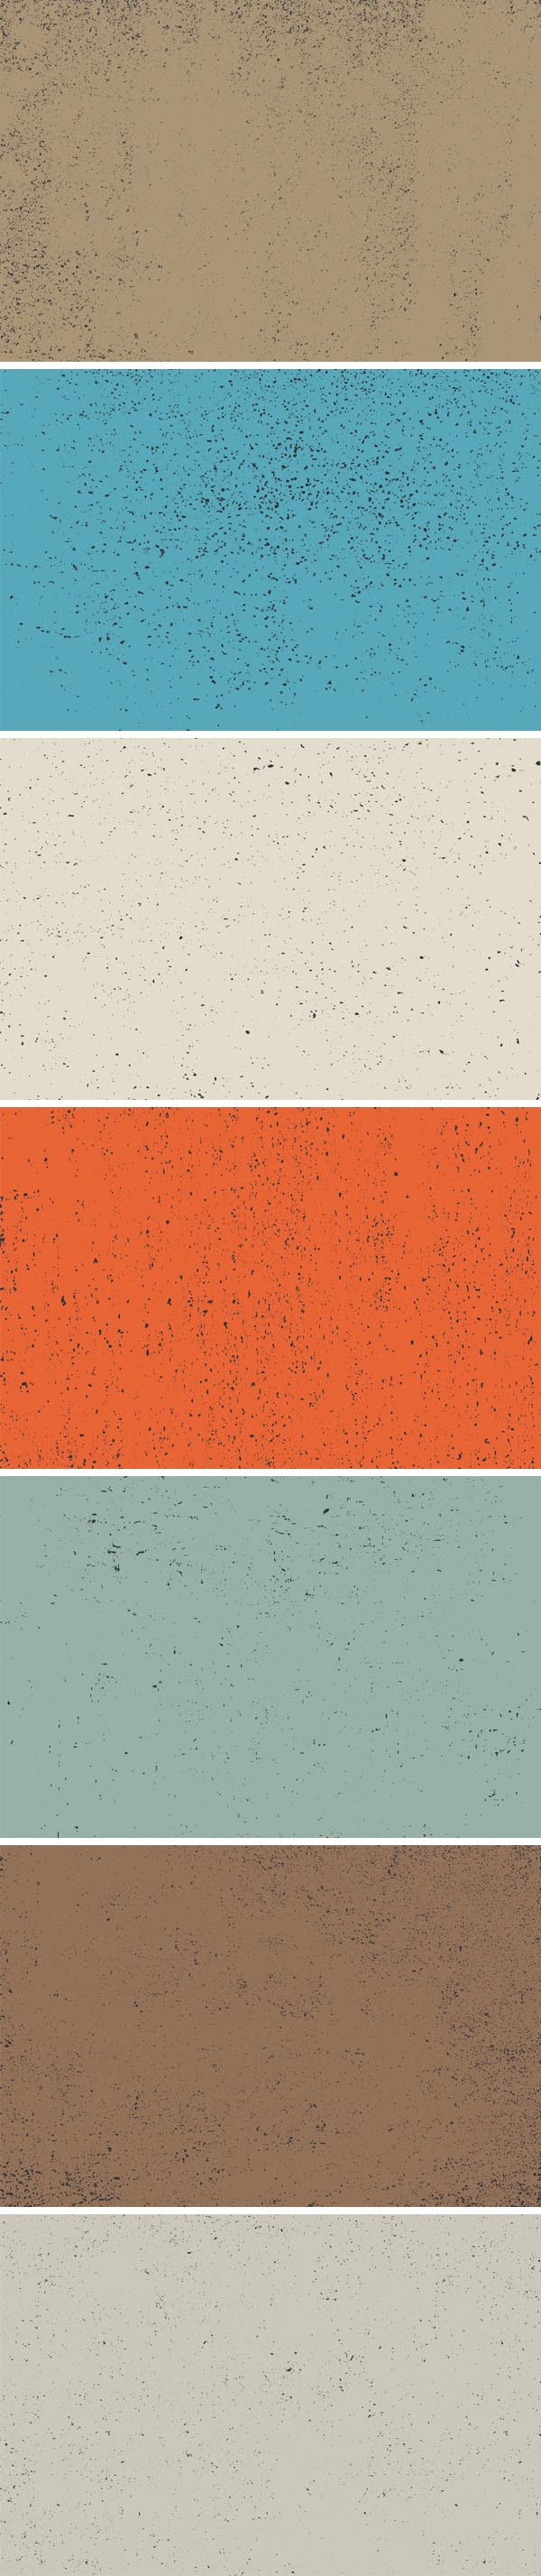 7 Free Vector Backgrounds of Speckled Textures